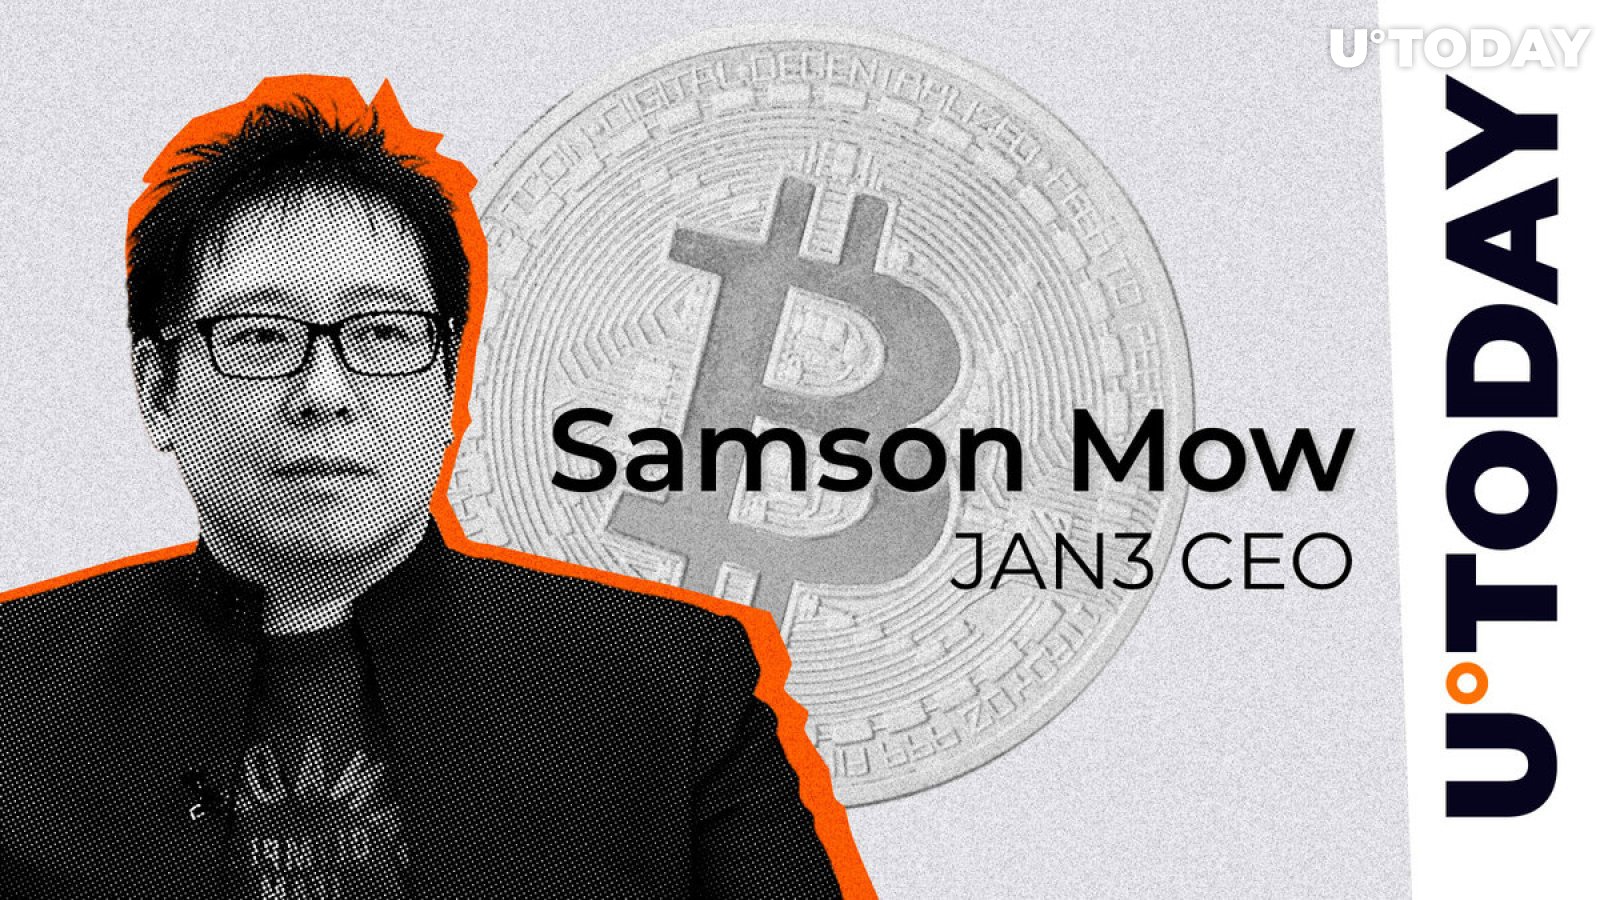 Samson Mow Teases Crucial Bitcoin Argument to Be Resolved Within Coming Months